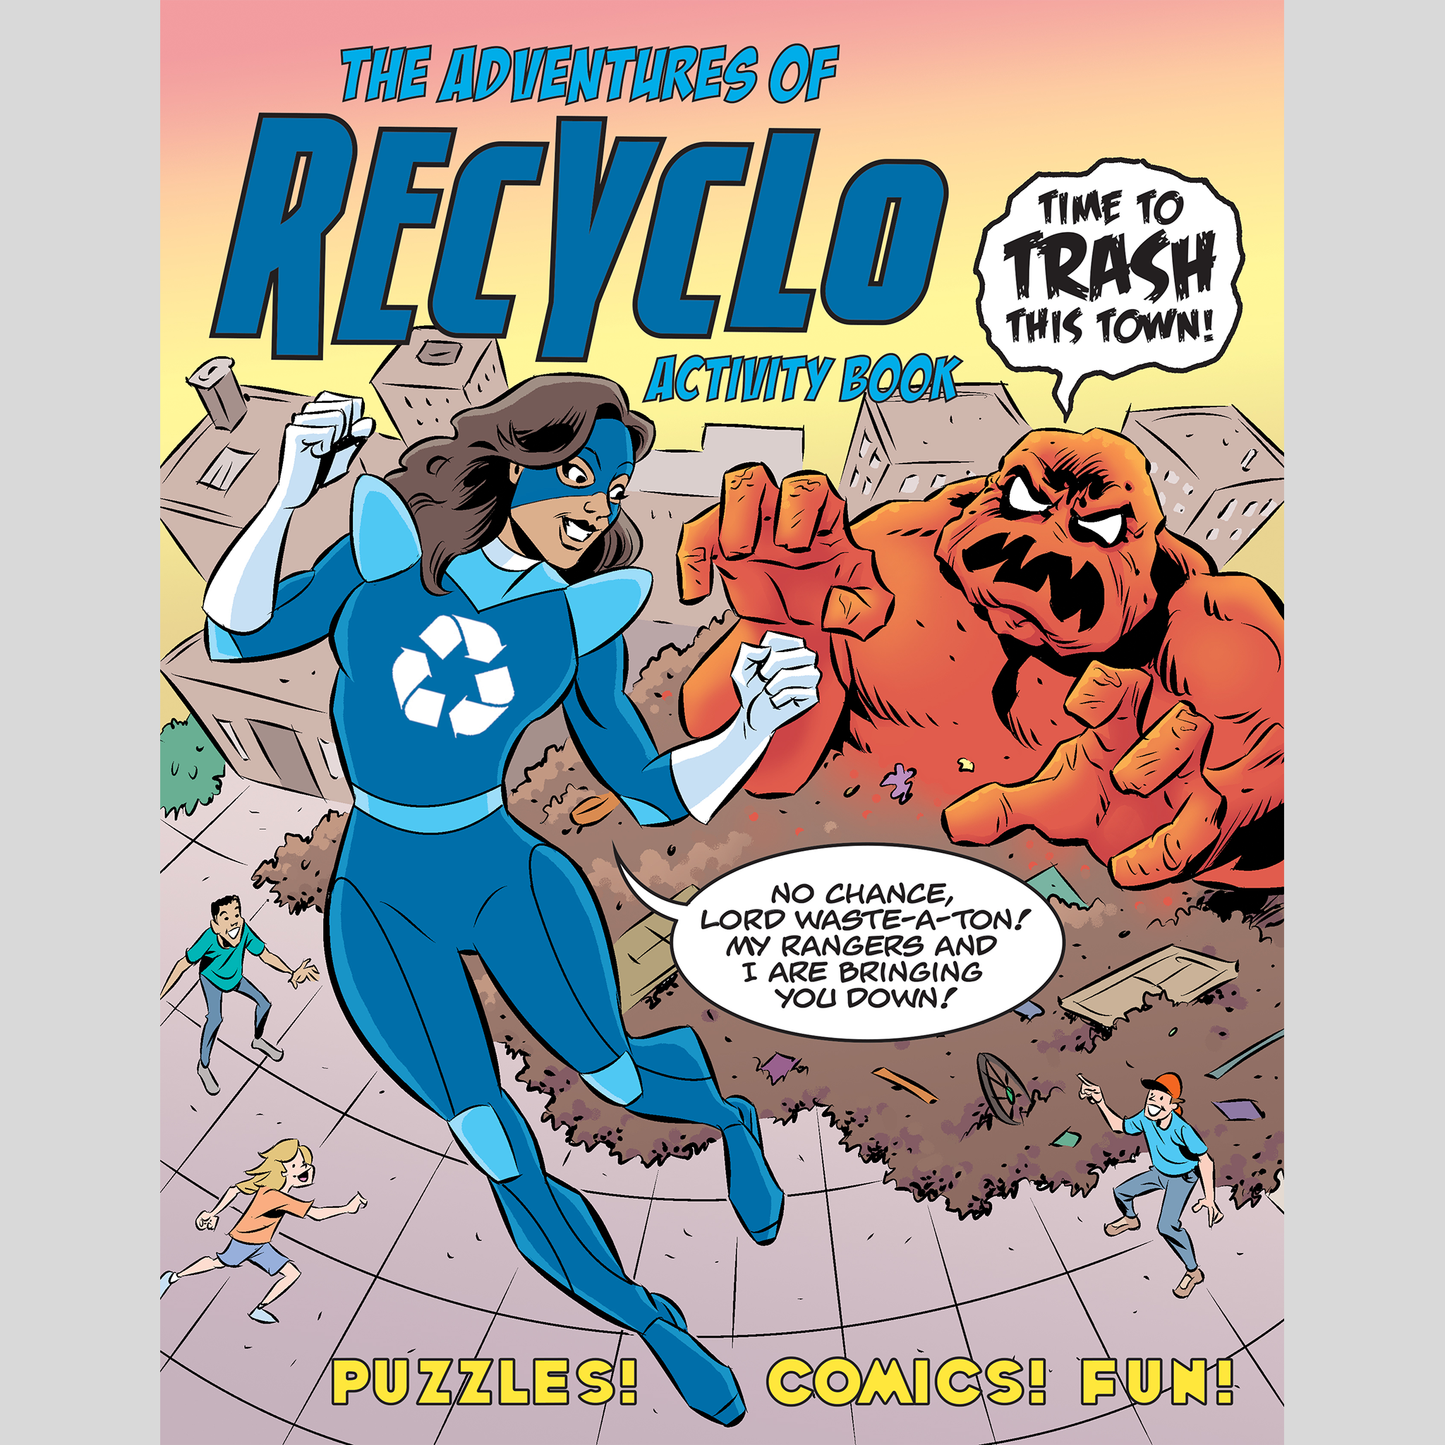 Recycling activity book for schools